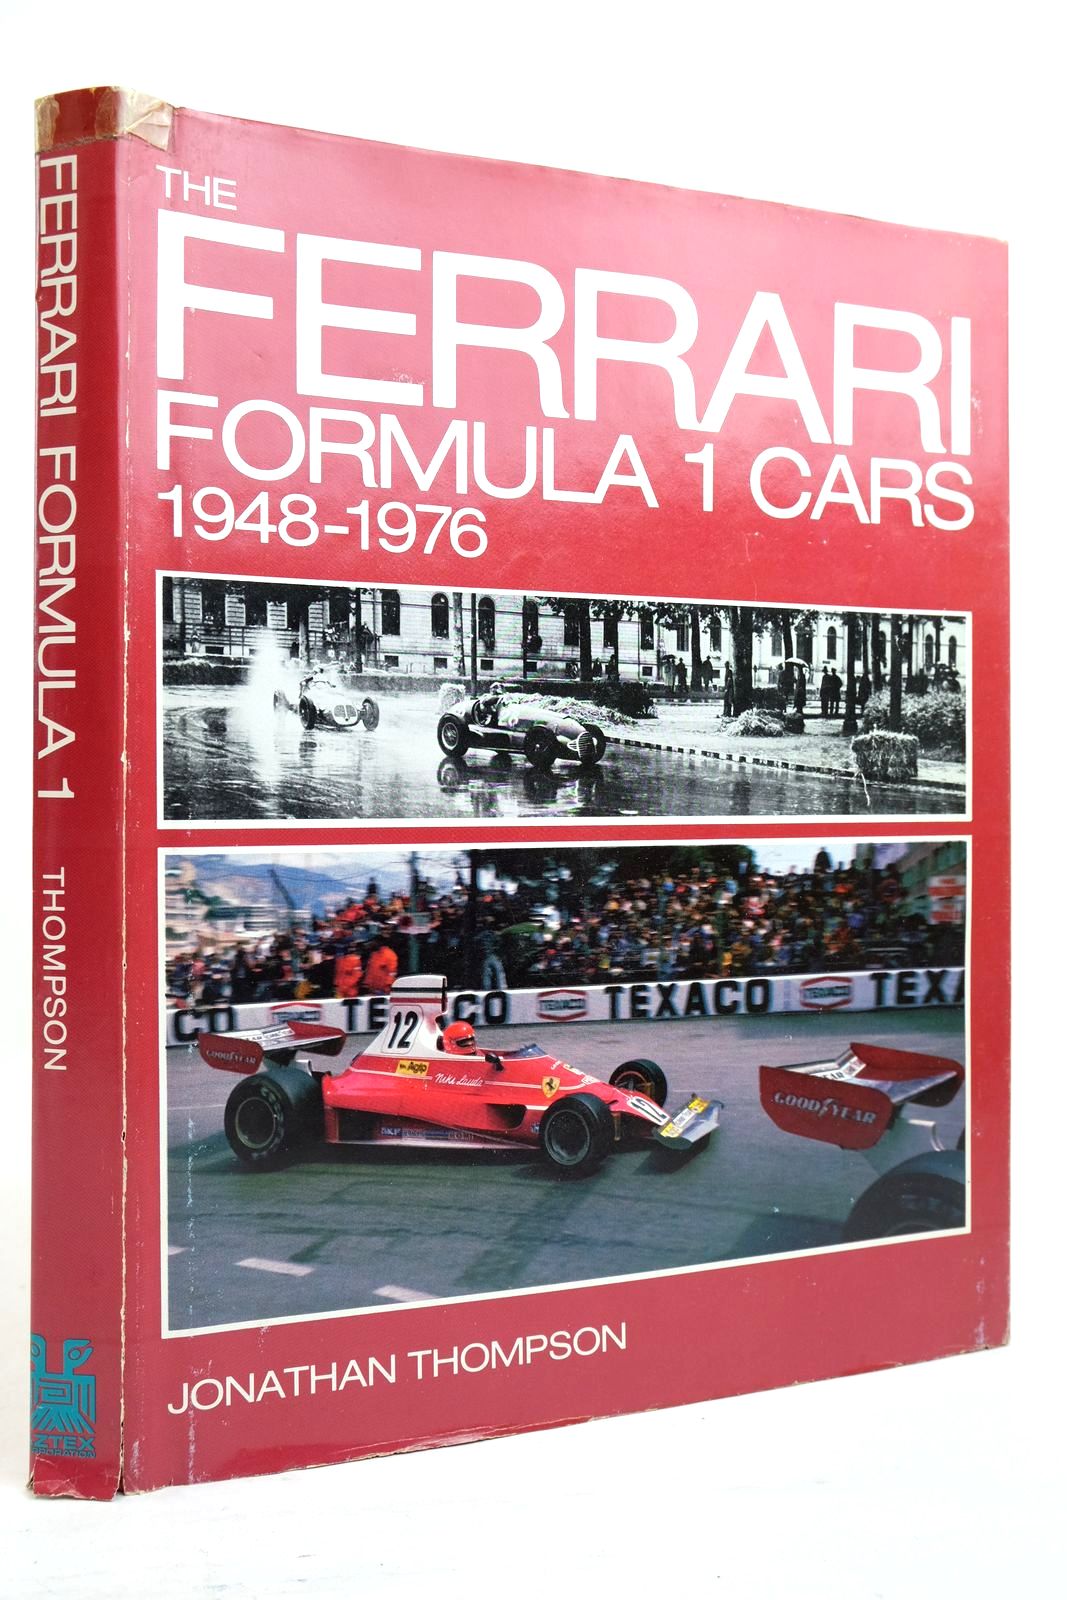 Photo of THE FERRARI FORMULA 1 CARS 1948-1976 written by Thompson, Jonathan published by Aztex Corporation (STOCK CODE: 2134647)  for sale by Stella & Rose's Books